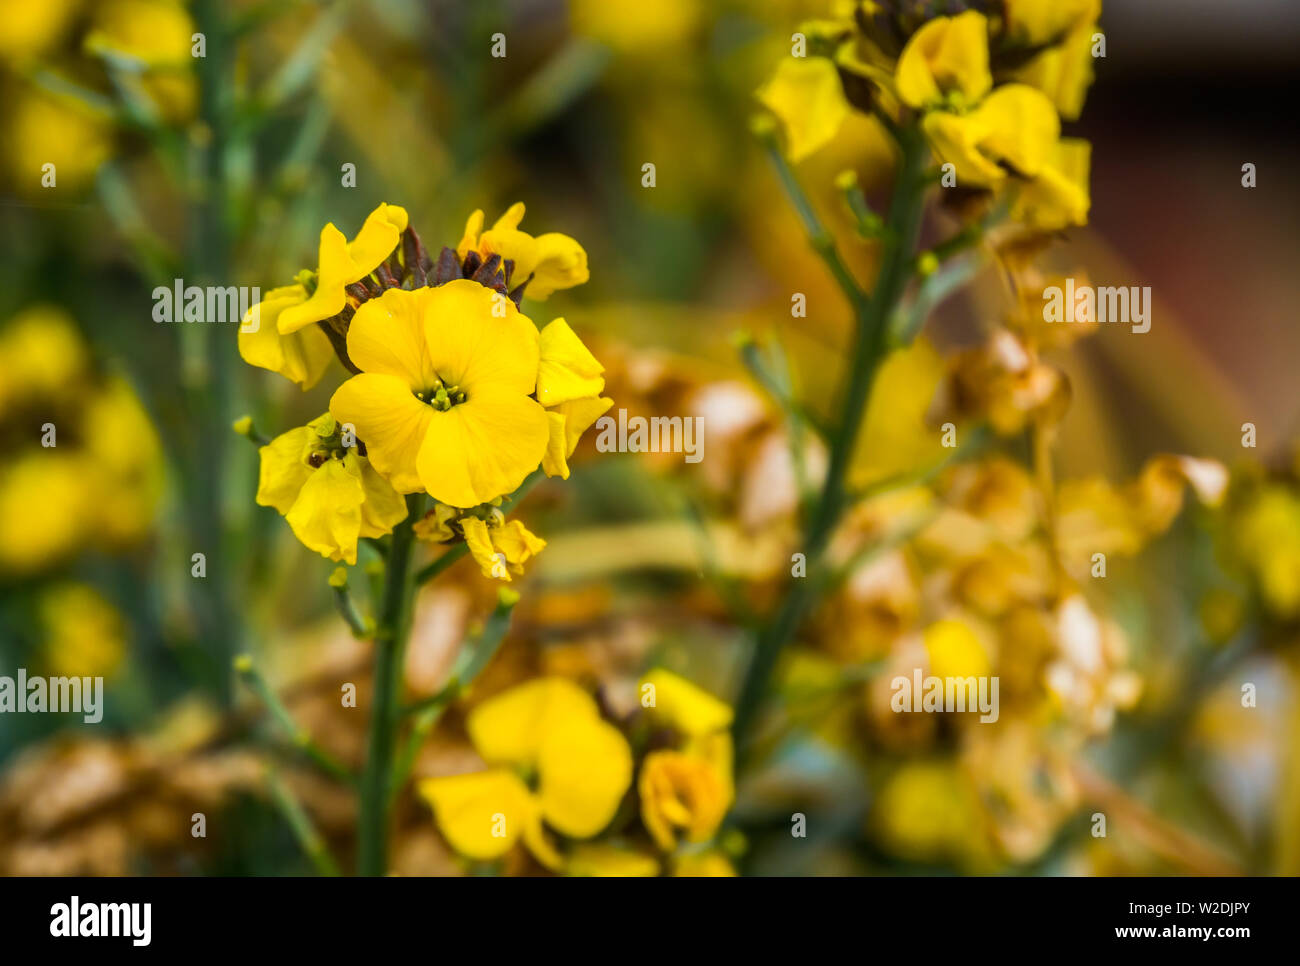 macro closeup of a cluster of yellow wallflowers in bloom, popular cultivated garden plant from Europe, nature background Stock Photo